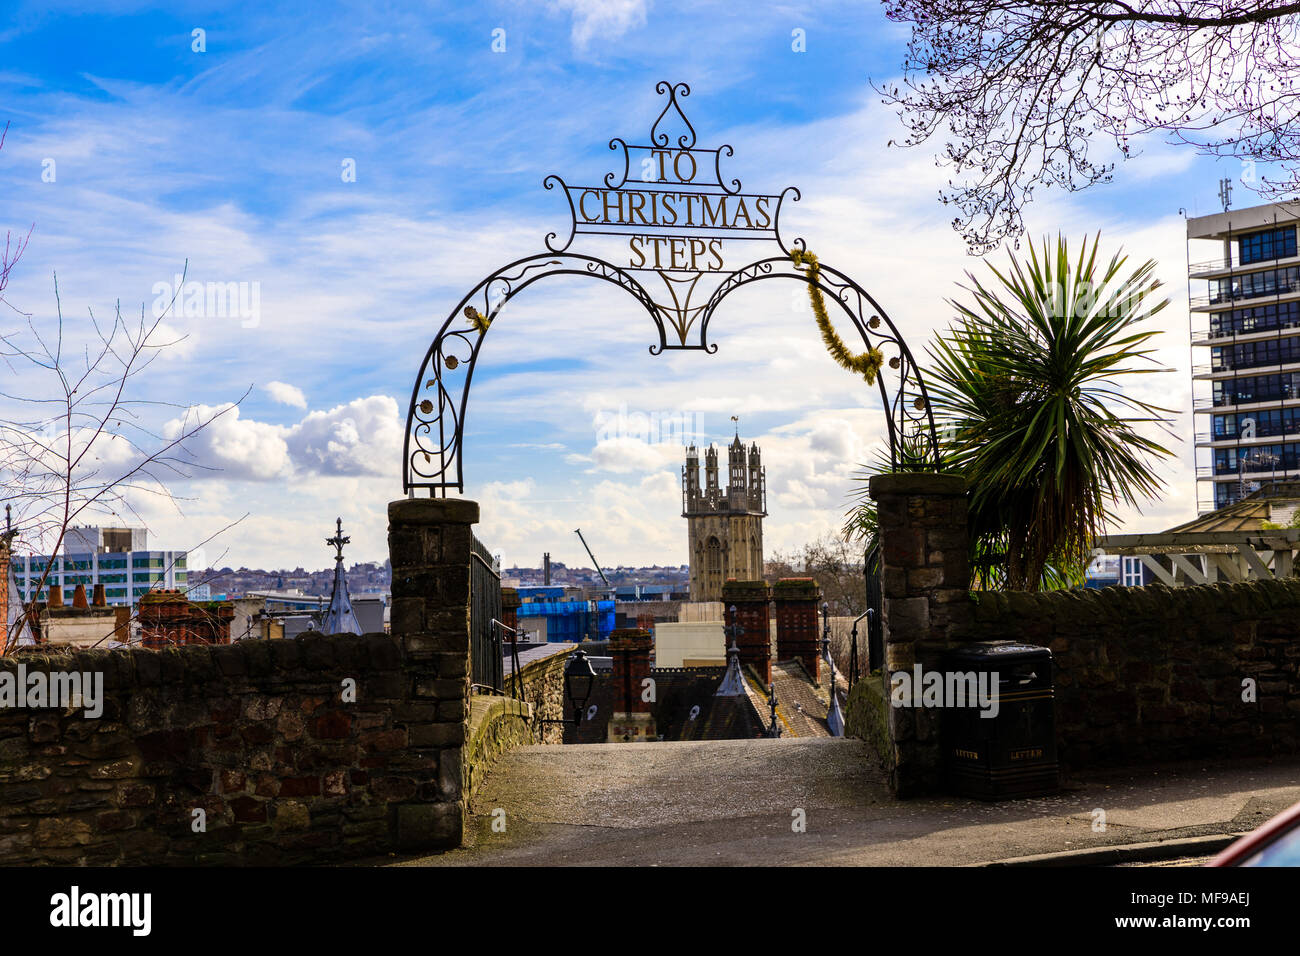 The entrance to Christmas Steps in Bristol (UK) Stock Photo